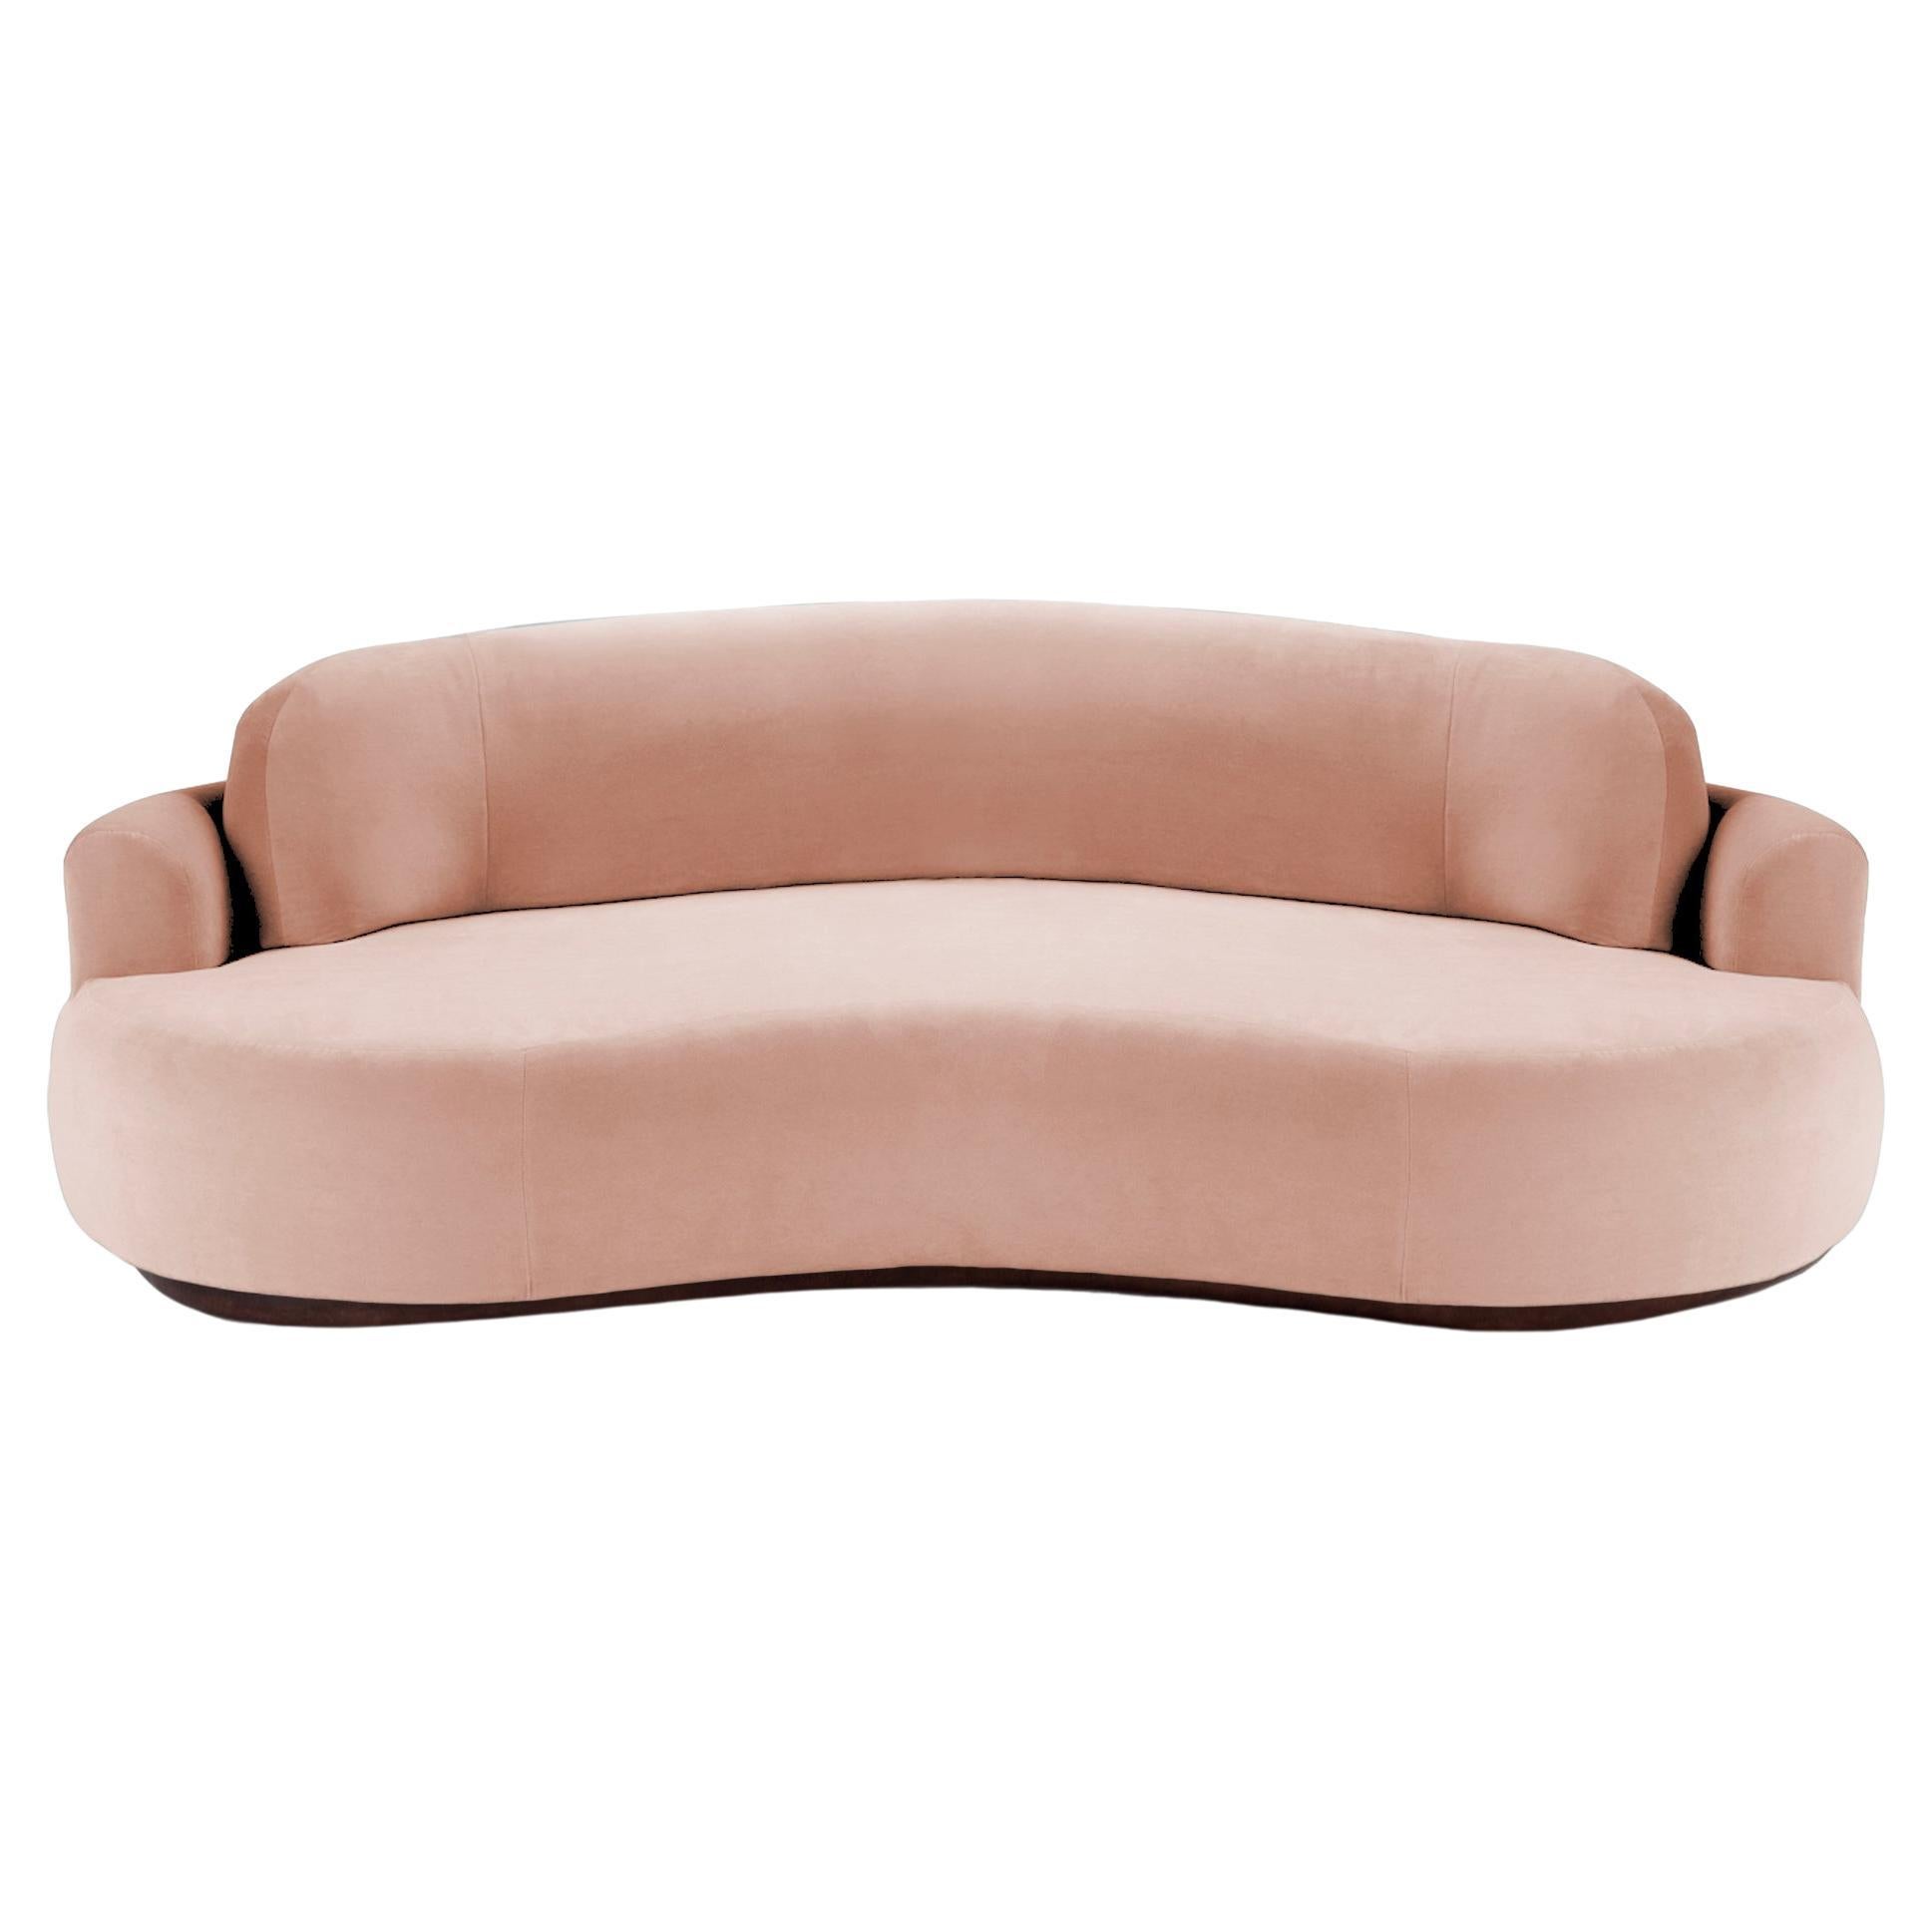 Handmade Contemporary Mambo Unlimited Ideas Naked Round Soft Apricot Upholstery For Sale